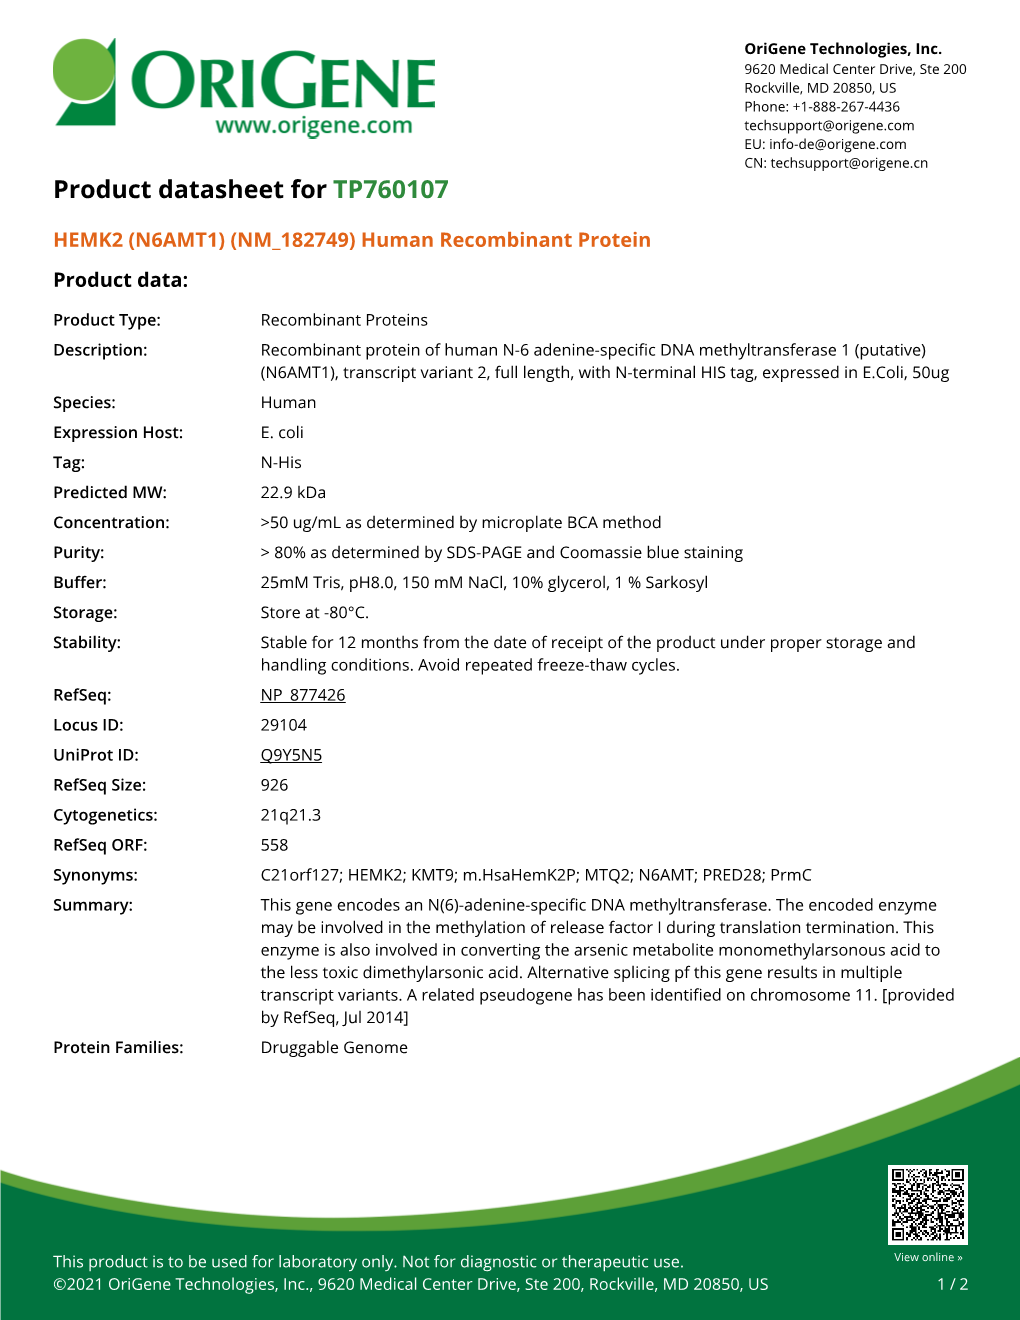 HEMK2 (N6AMT1) (NM 182749) Human Recombinant Protein Product Data